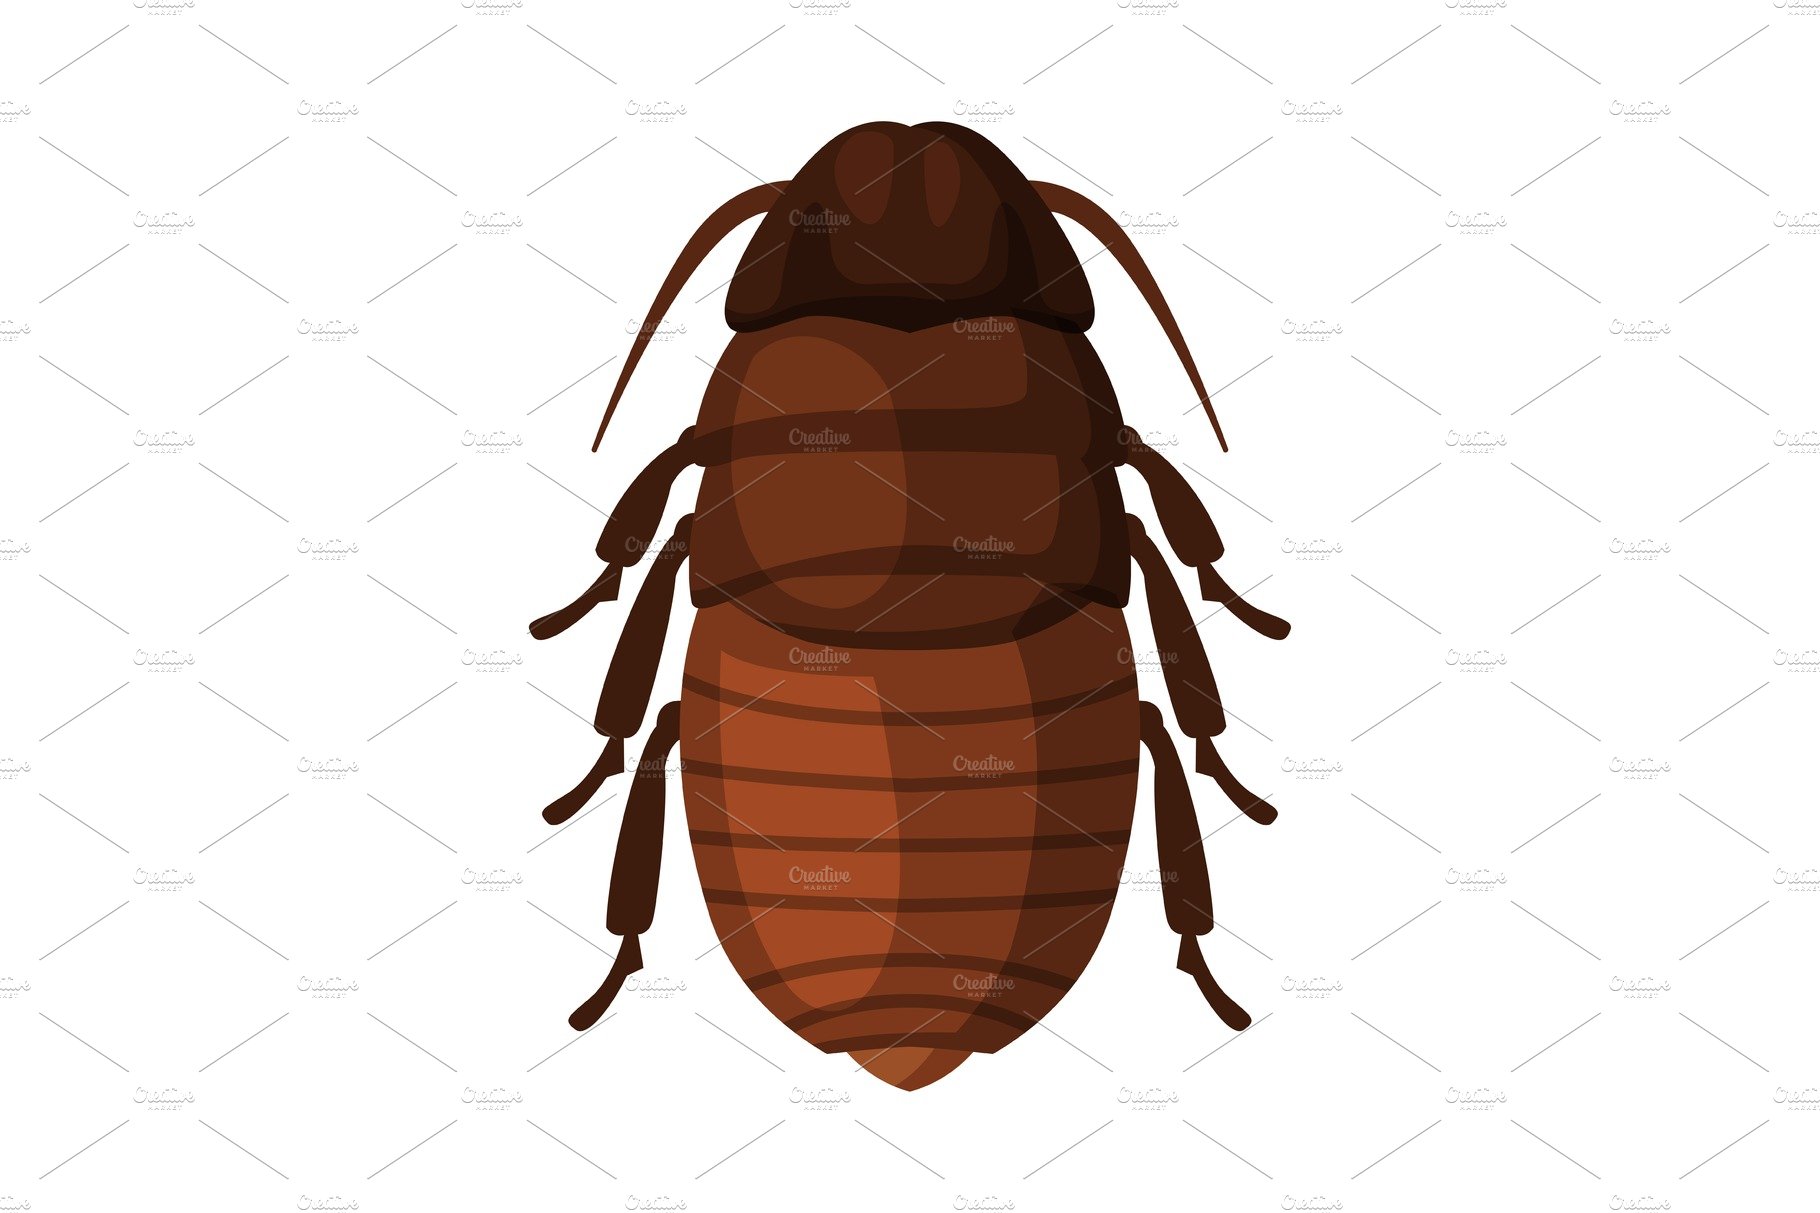 Black Cockroach Insect, Pest cover image.